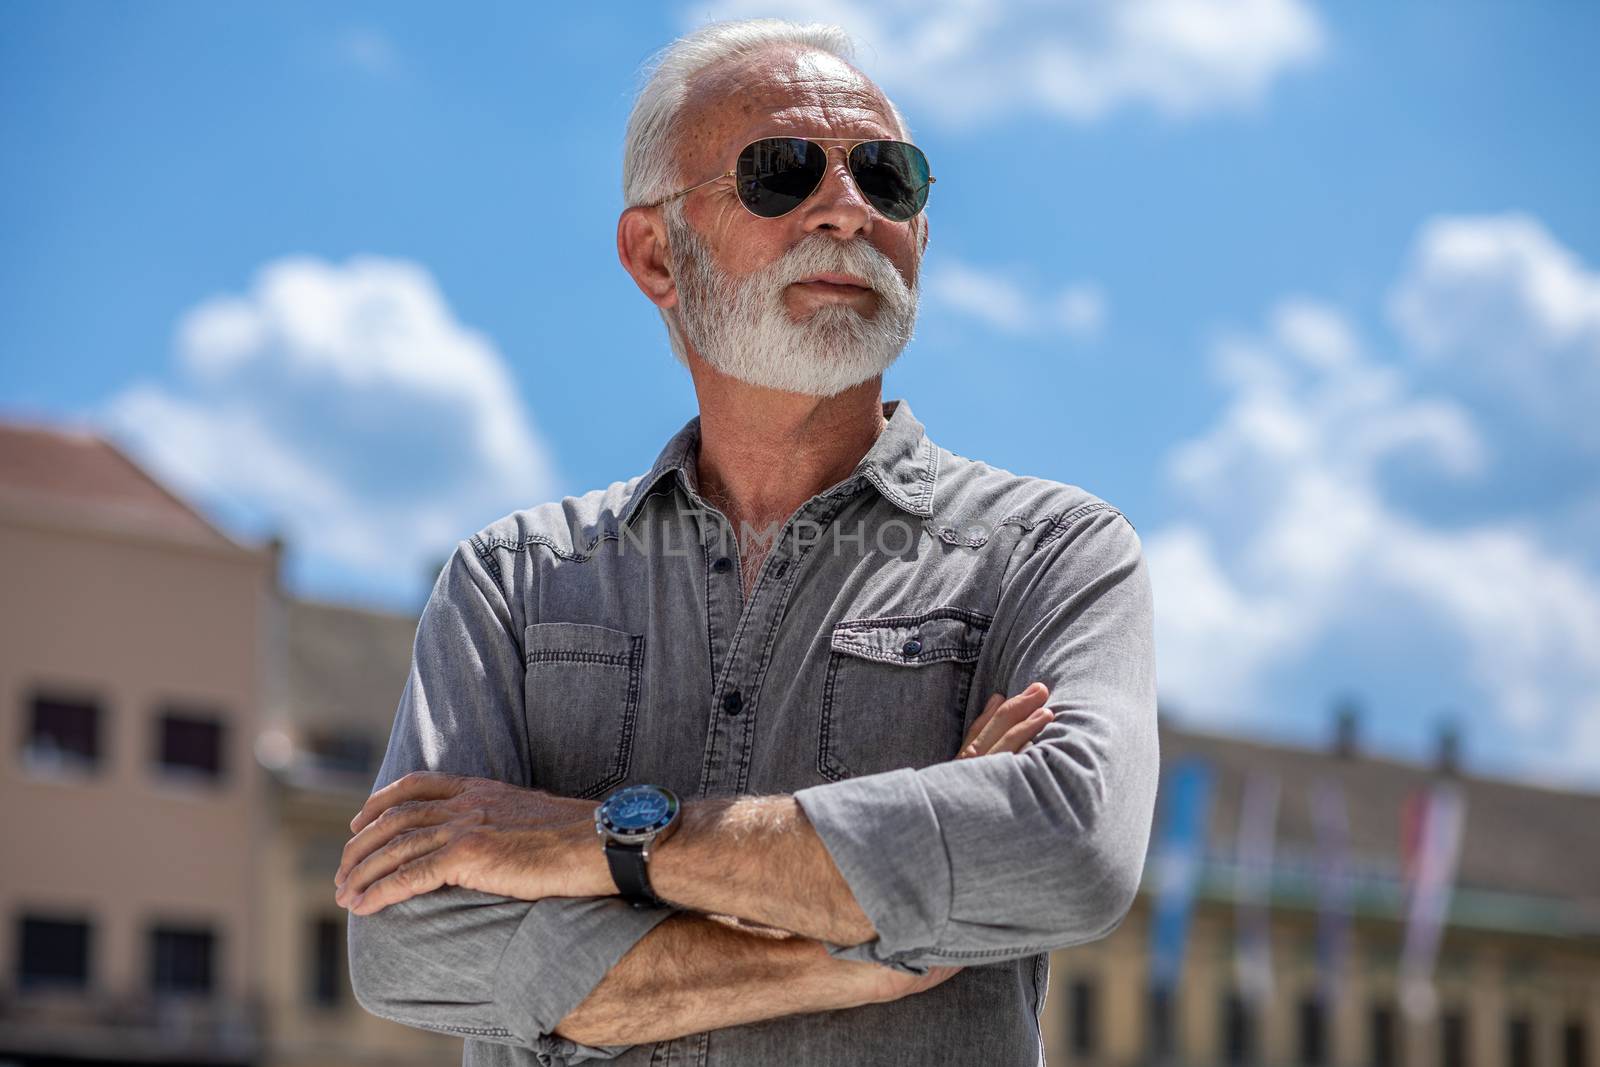 Experienced rich senior old man with beard and sunglass on street posing and smiling, portrait